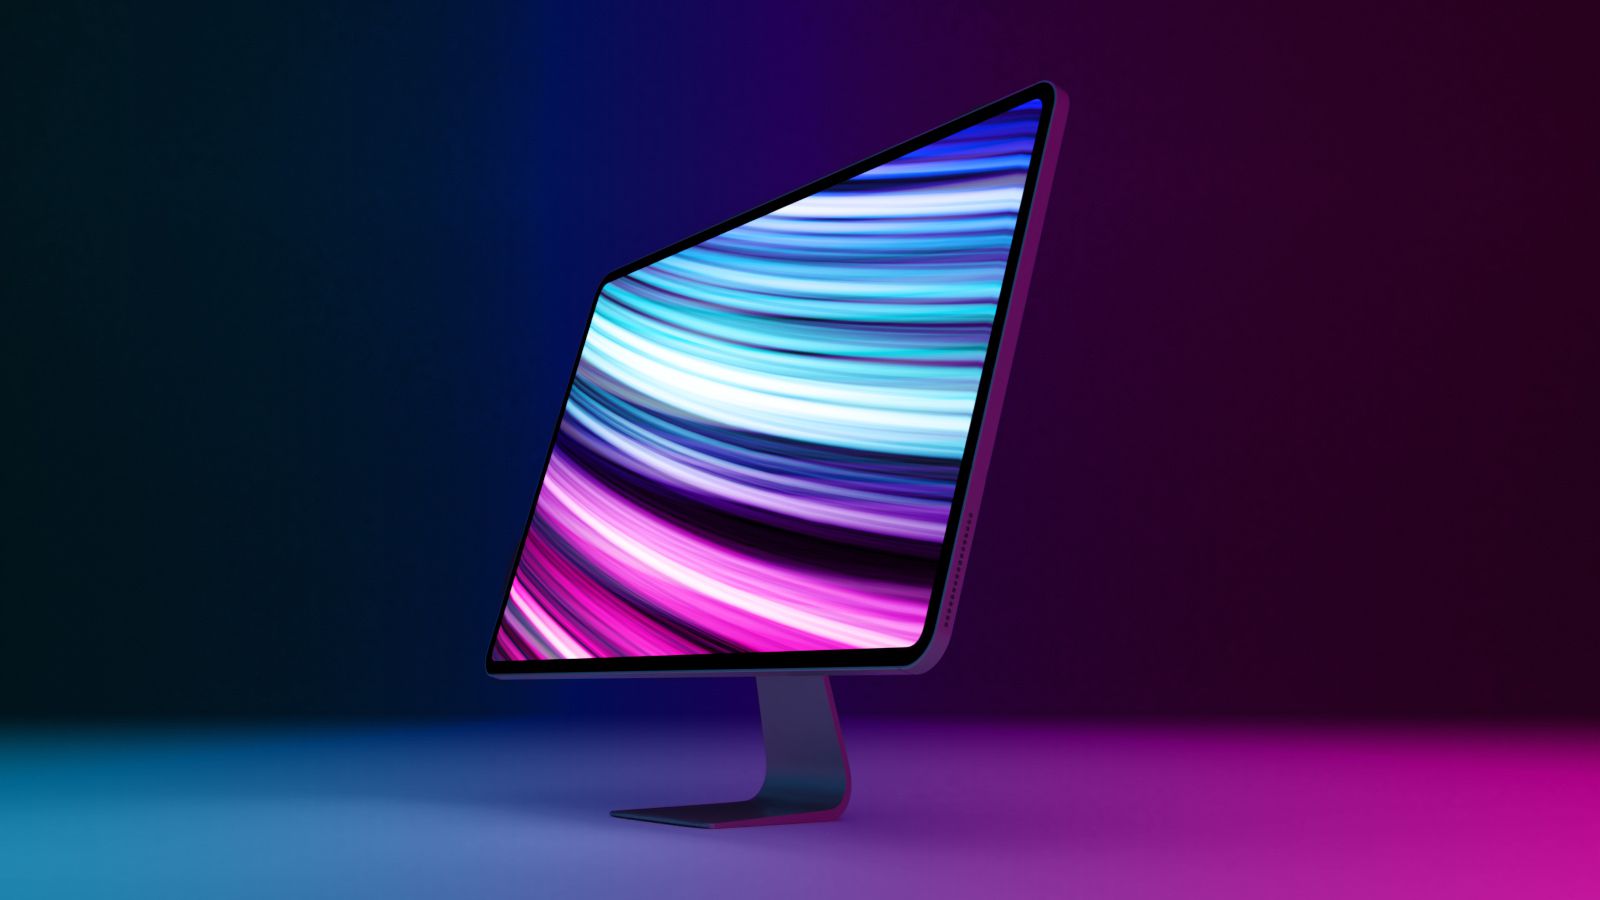 Credible Leaker says the new iMac will have a 